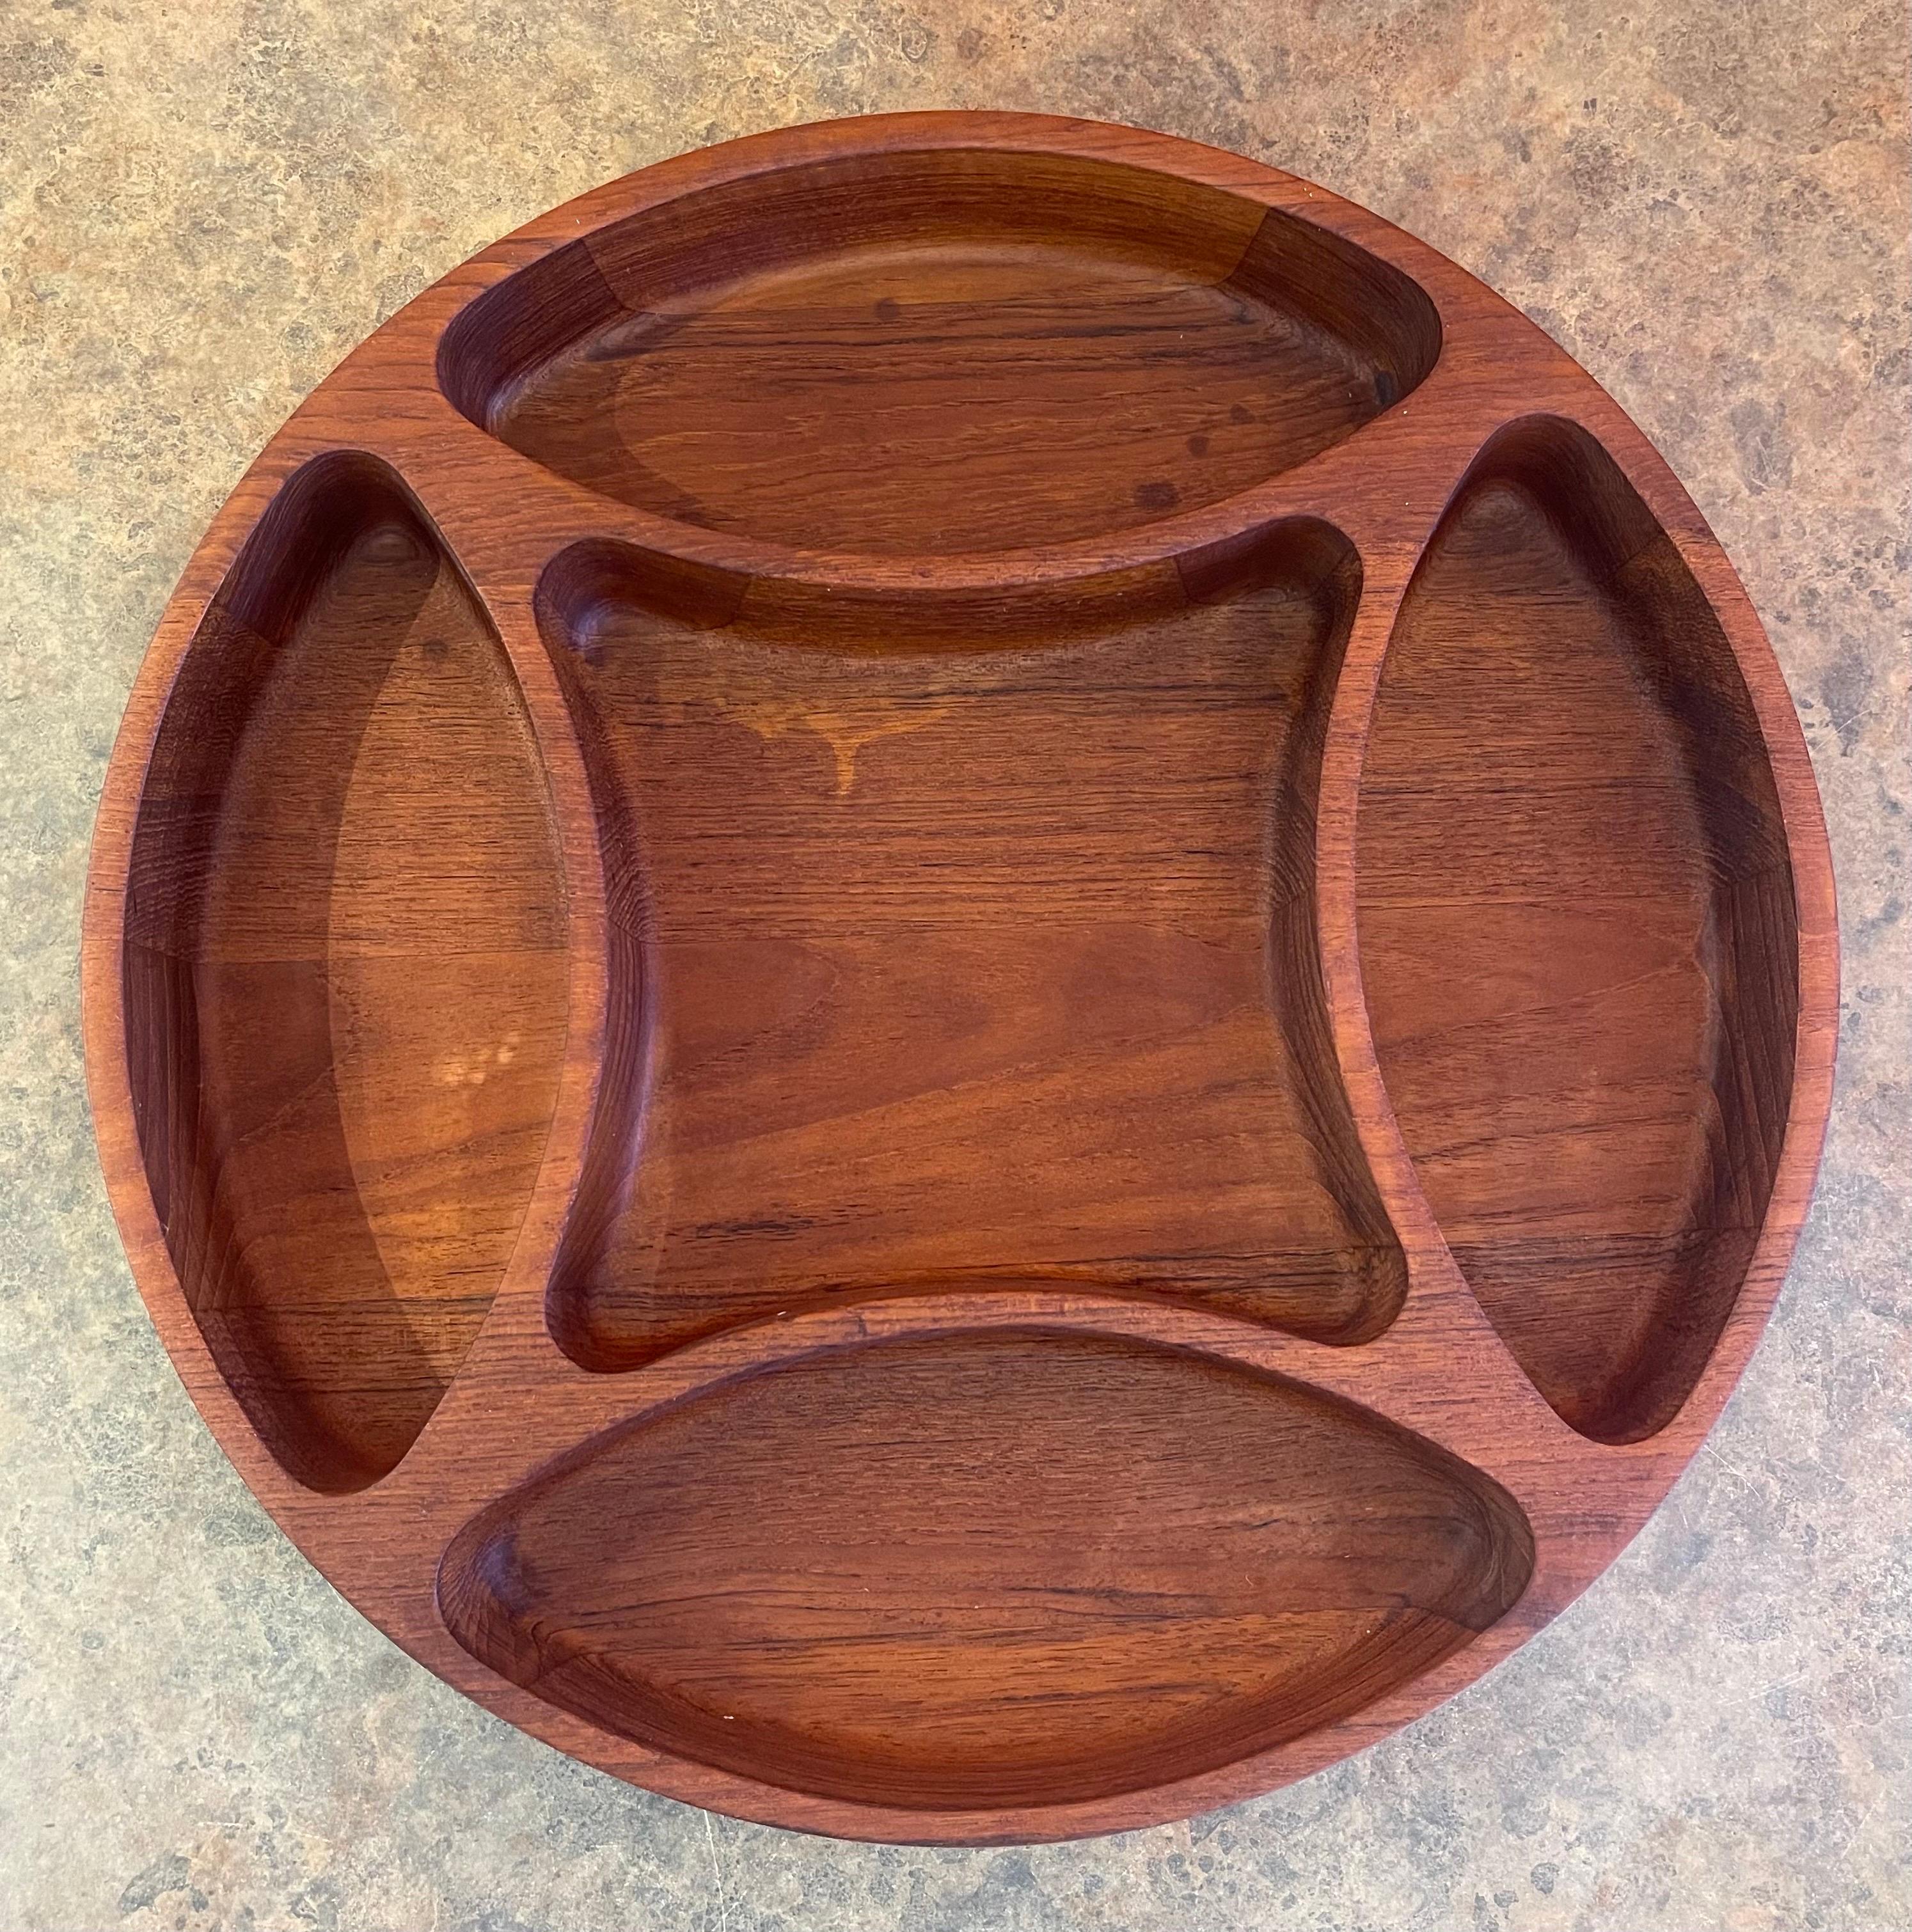 Large Divided Bowl / Tray in Teak by Jens Quistgaard for Dansk For Sale 2